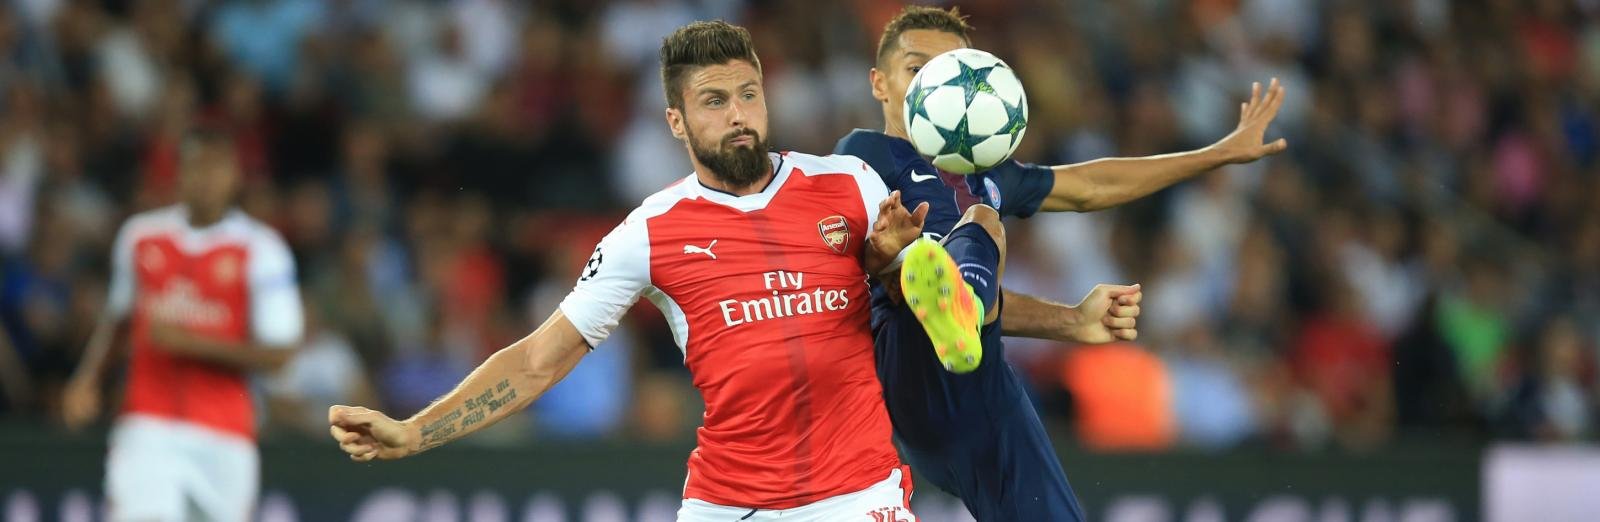 Champions League Round-Up: Arsenal snatch point in Paris, Celtic trounced 7-0 in Barcelona